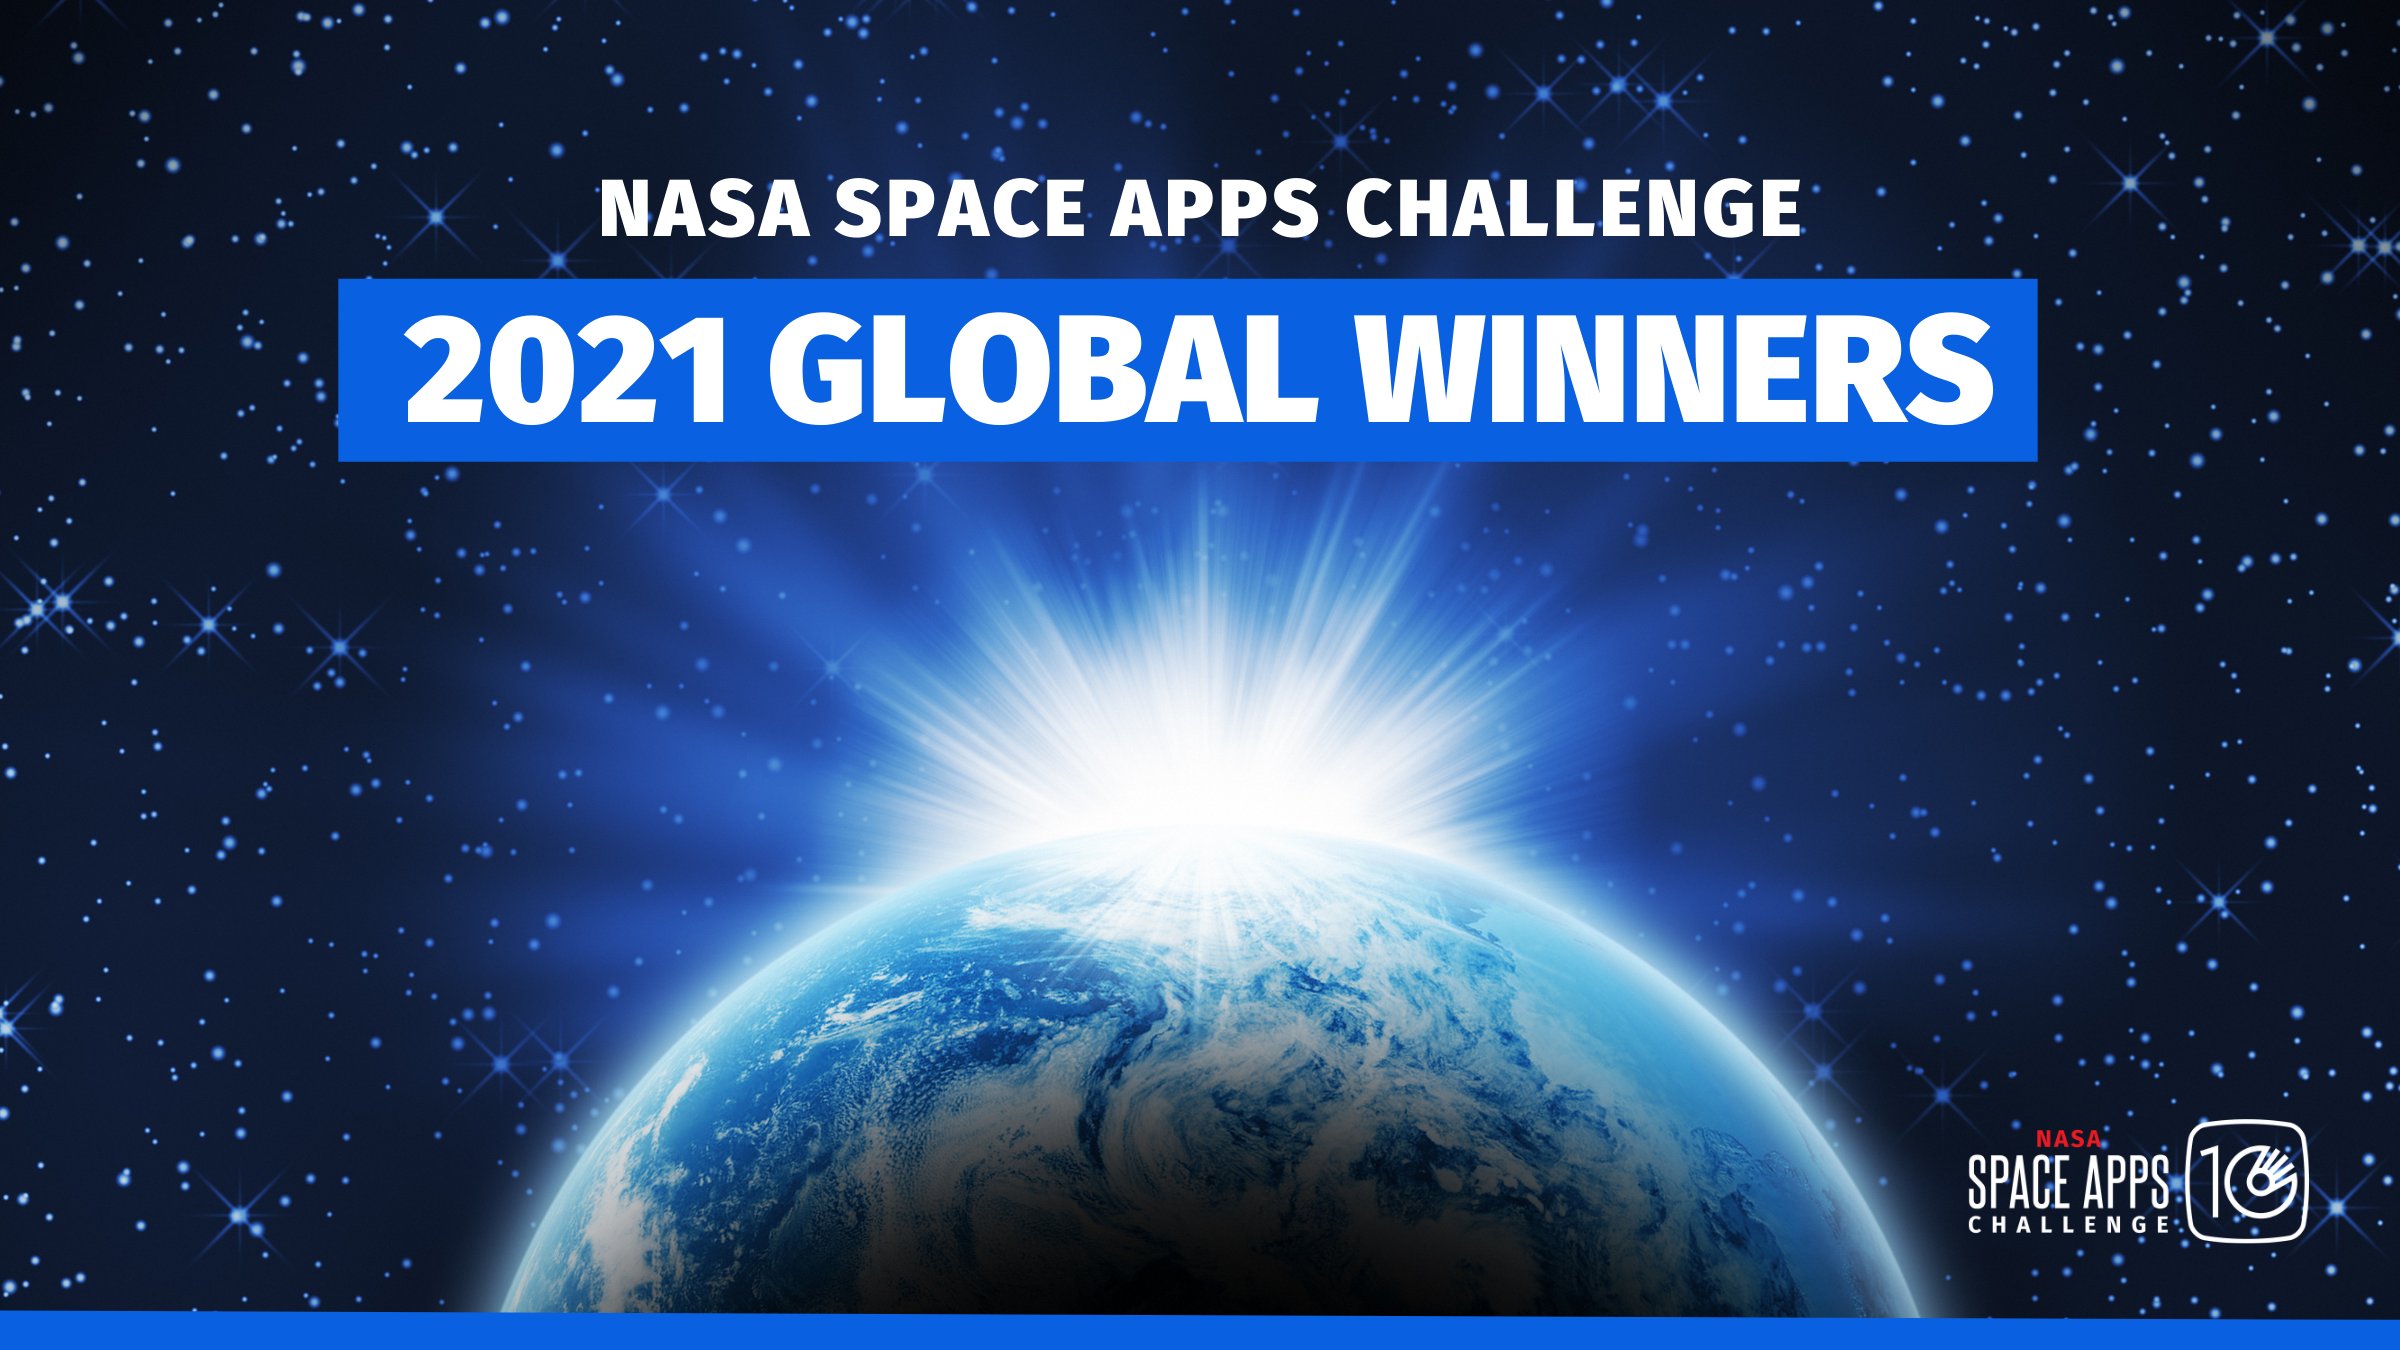 Make it Cool - Space Apps Challenge